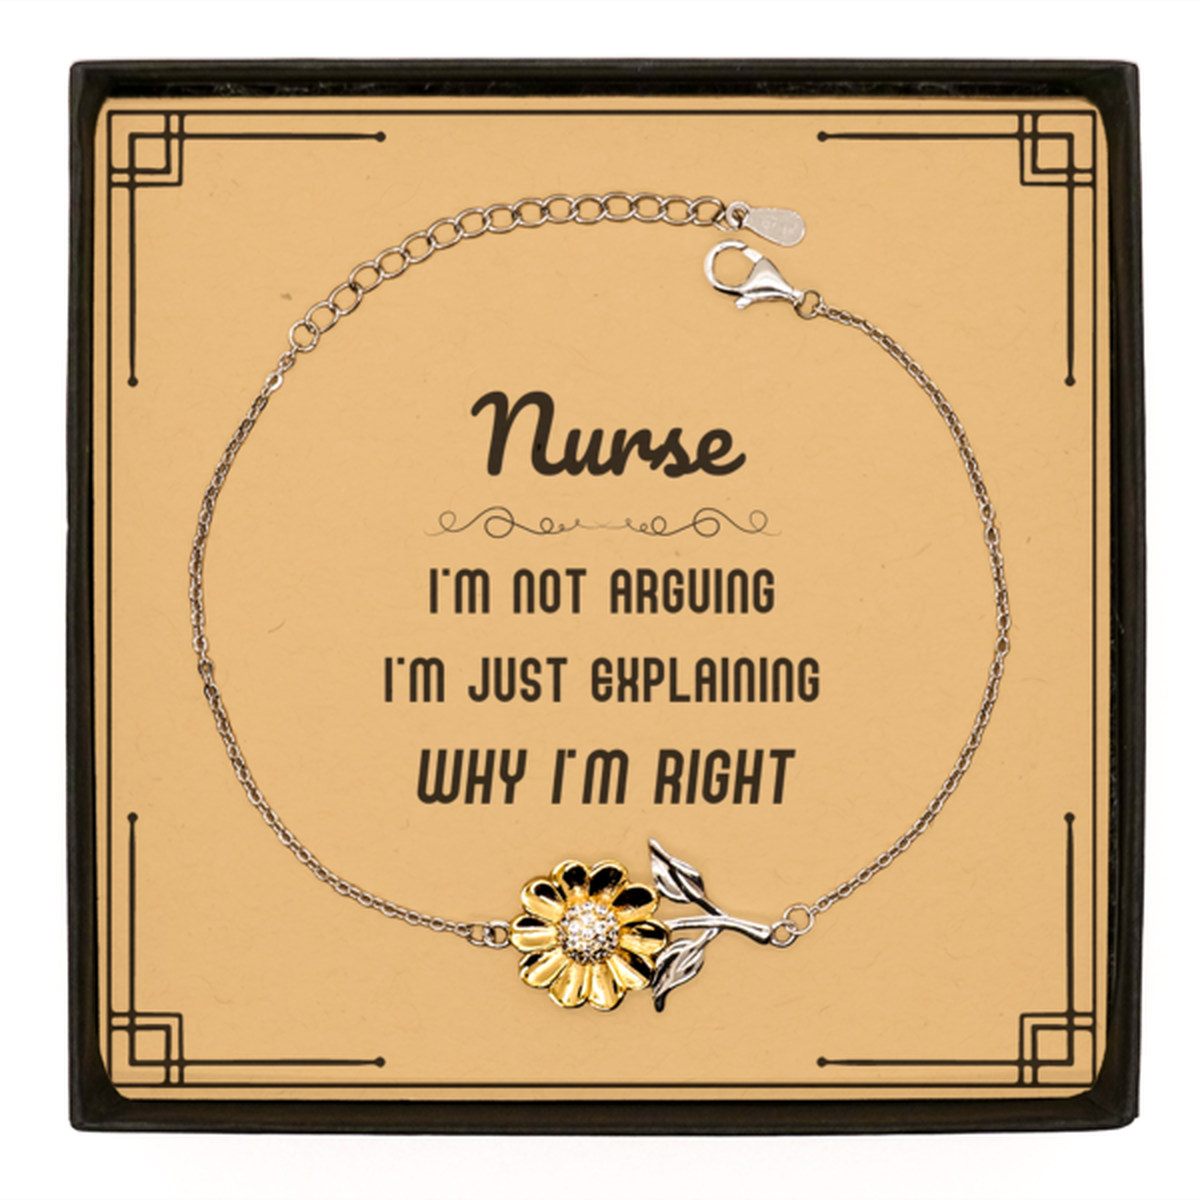 Nurse I'm not Arguing. I'm Just Explaining Why I'm RIGHT Sunflower Bracelet, Funny Saying Quote Nurse Gifts For Nurse Message Card Graduation Birthday Christmas Gifts for Men Women Coworker